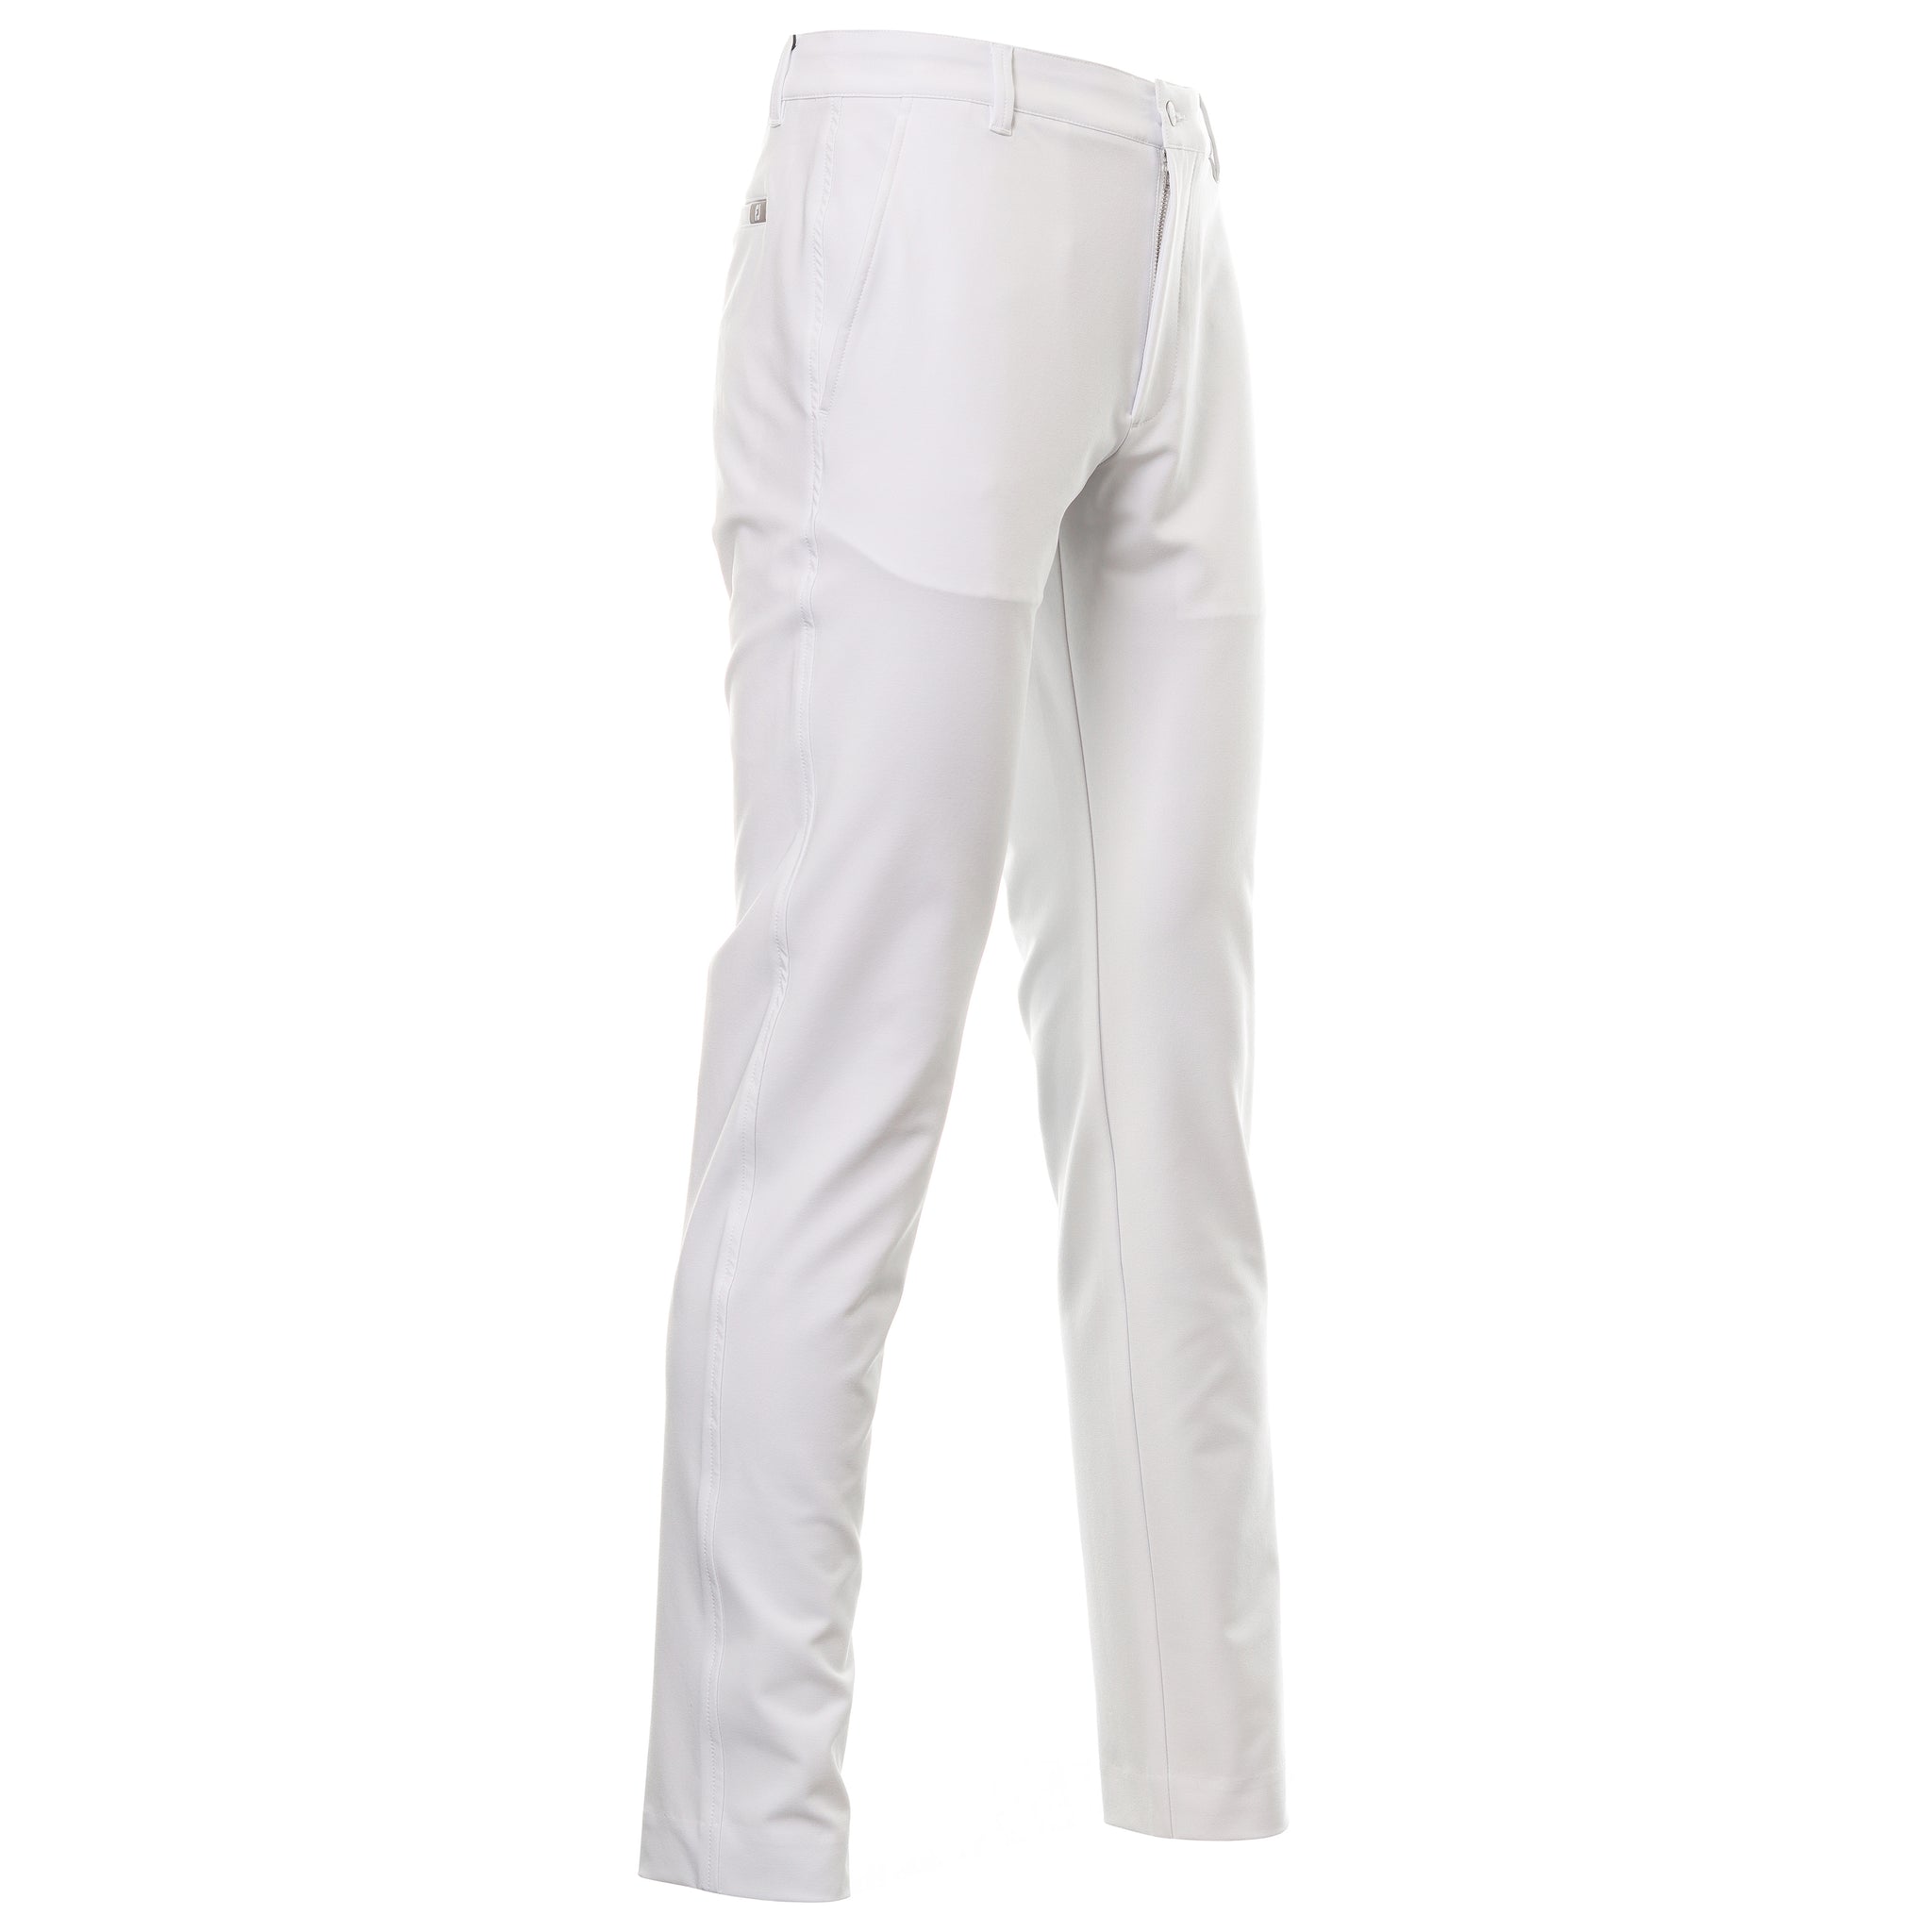 footjoy-fj-performance-tapered-fit-trousers-80159-white